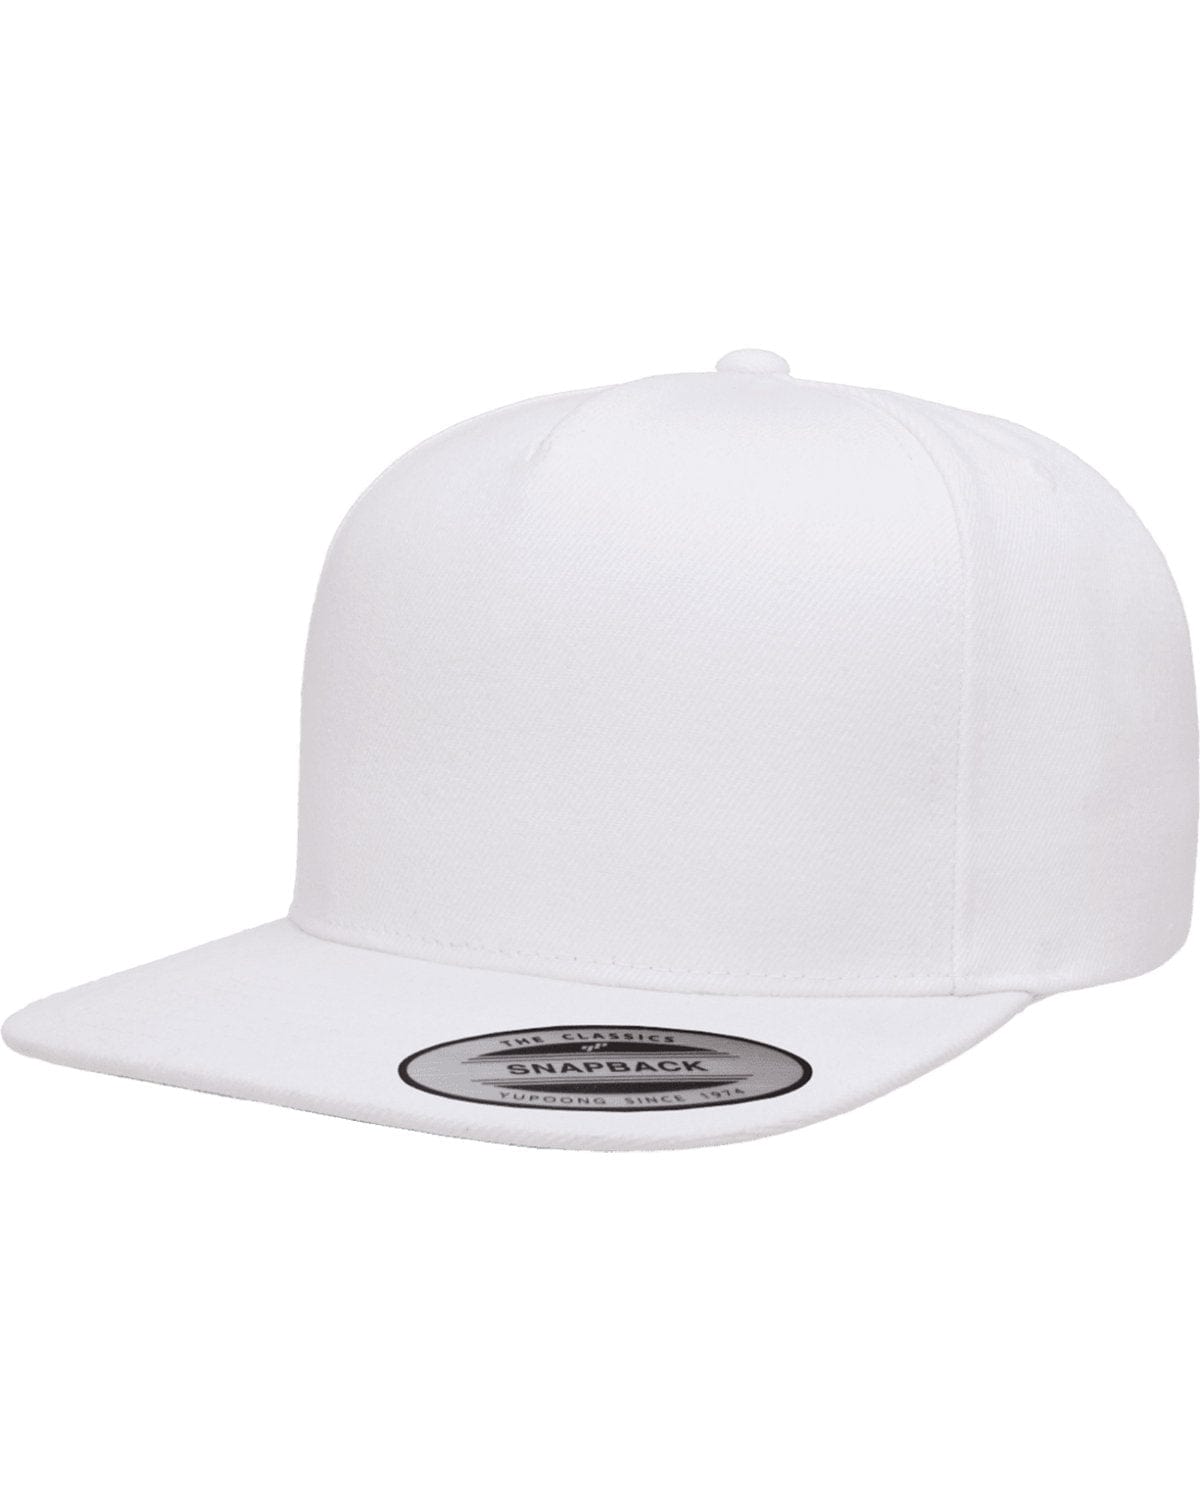 Yupoong YP5089: Adult 5-Panel Structured Flat Visor Classic Snapback Cap